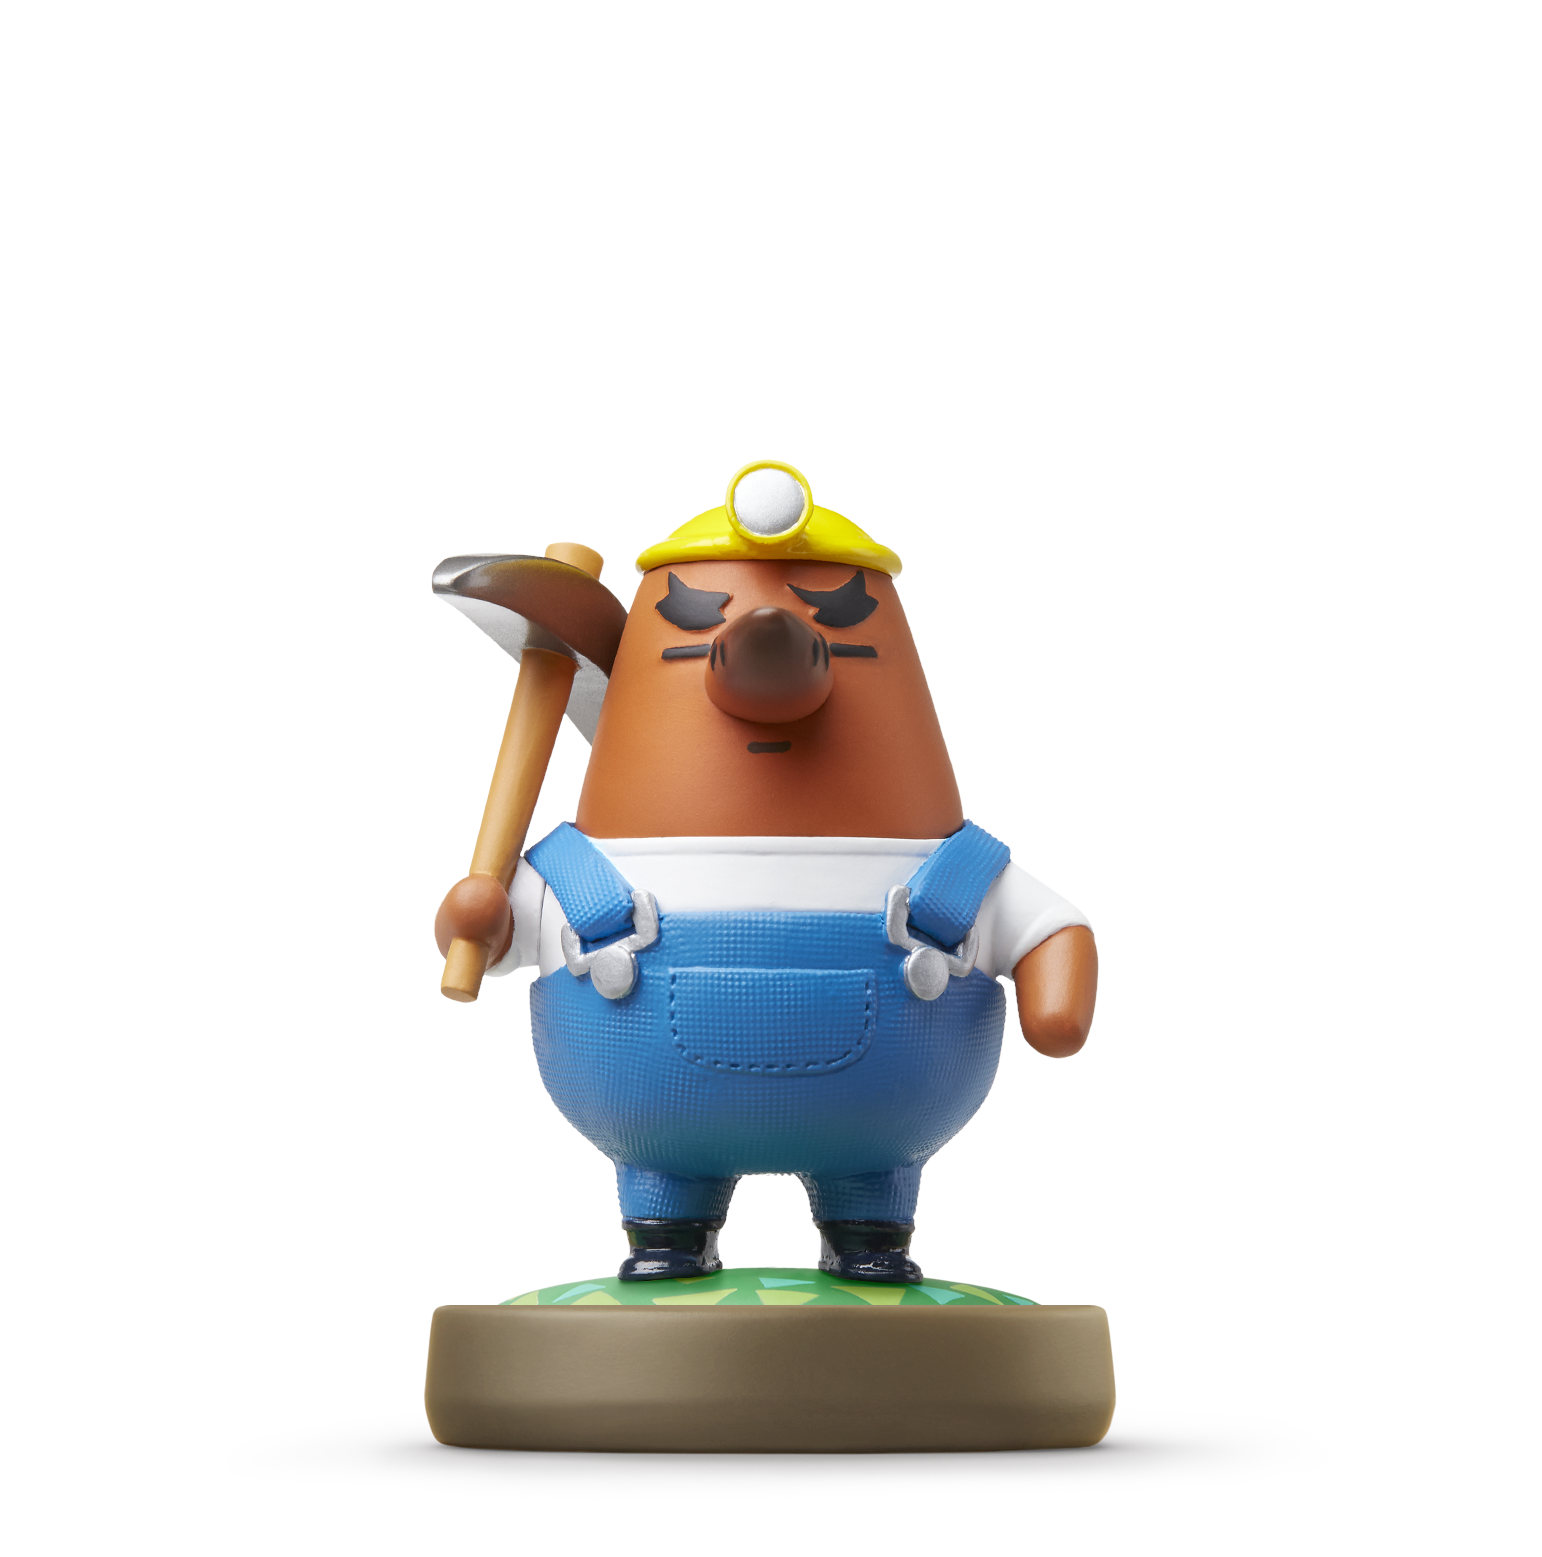 The second wave of Animal Crossing amiibo figures are coming in January